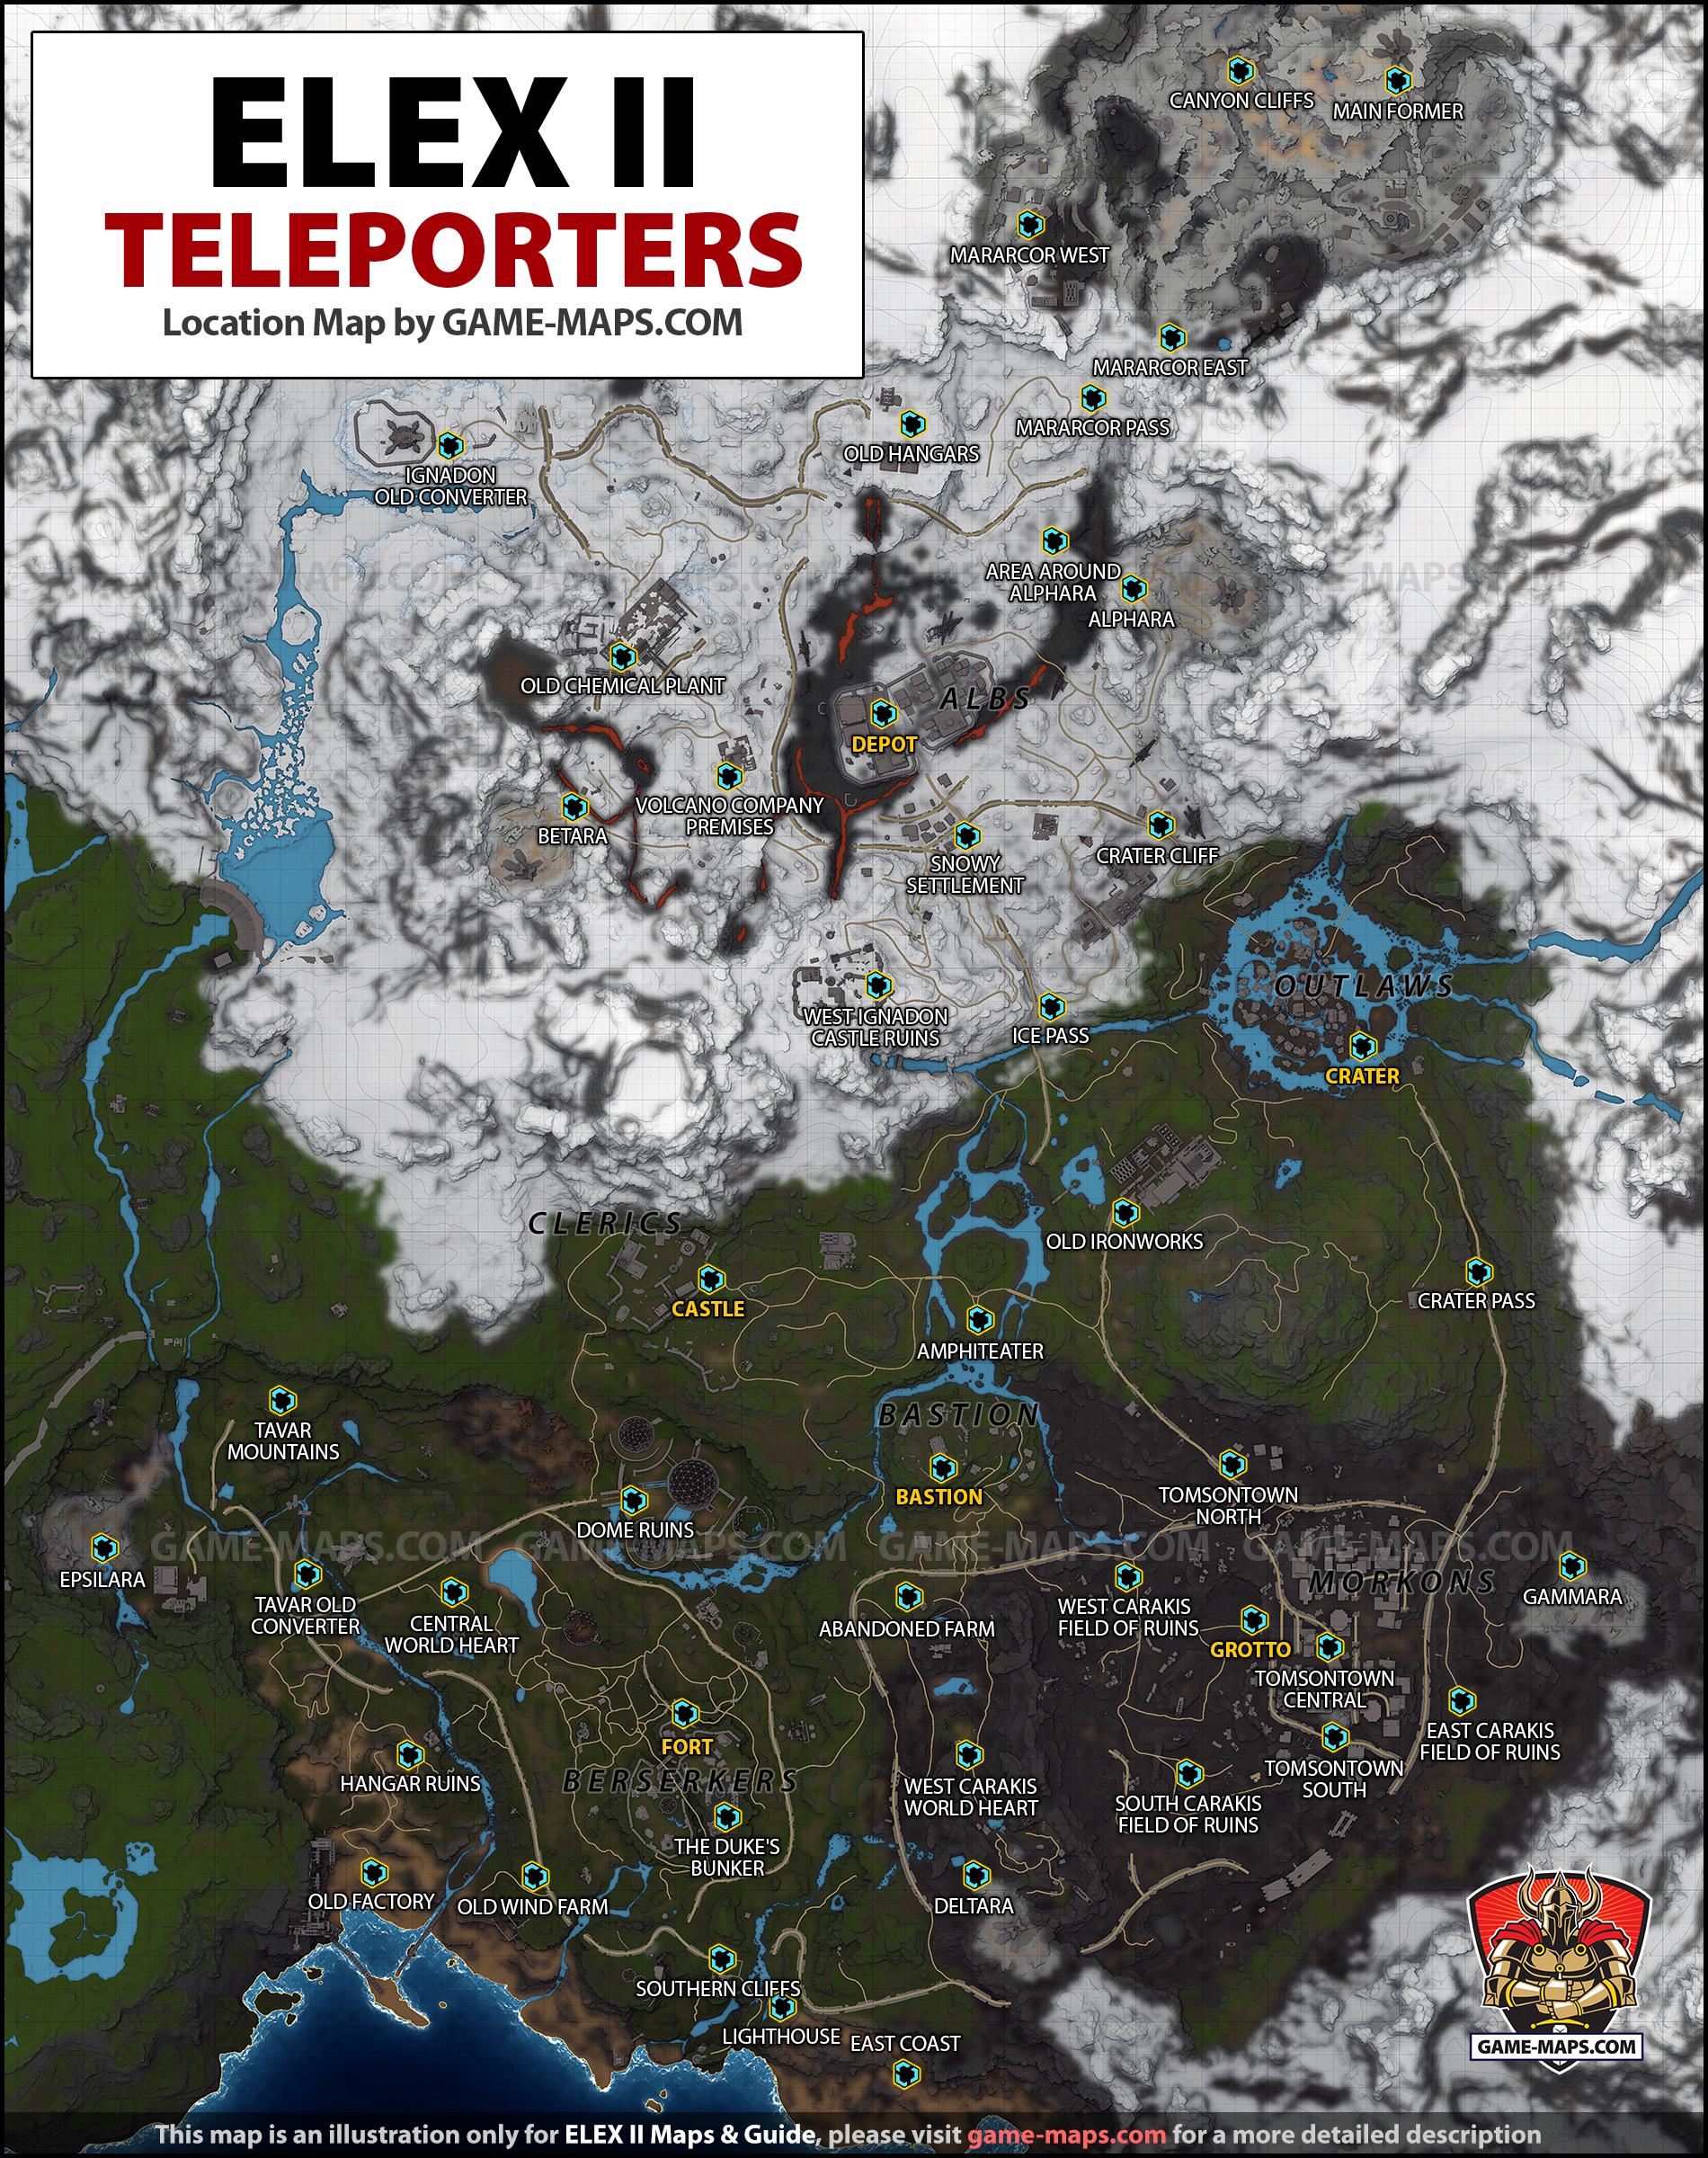 Map for ELEX II with location of Teleporters